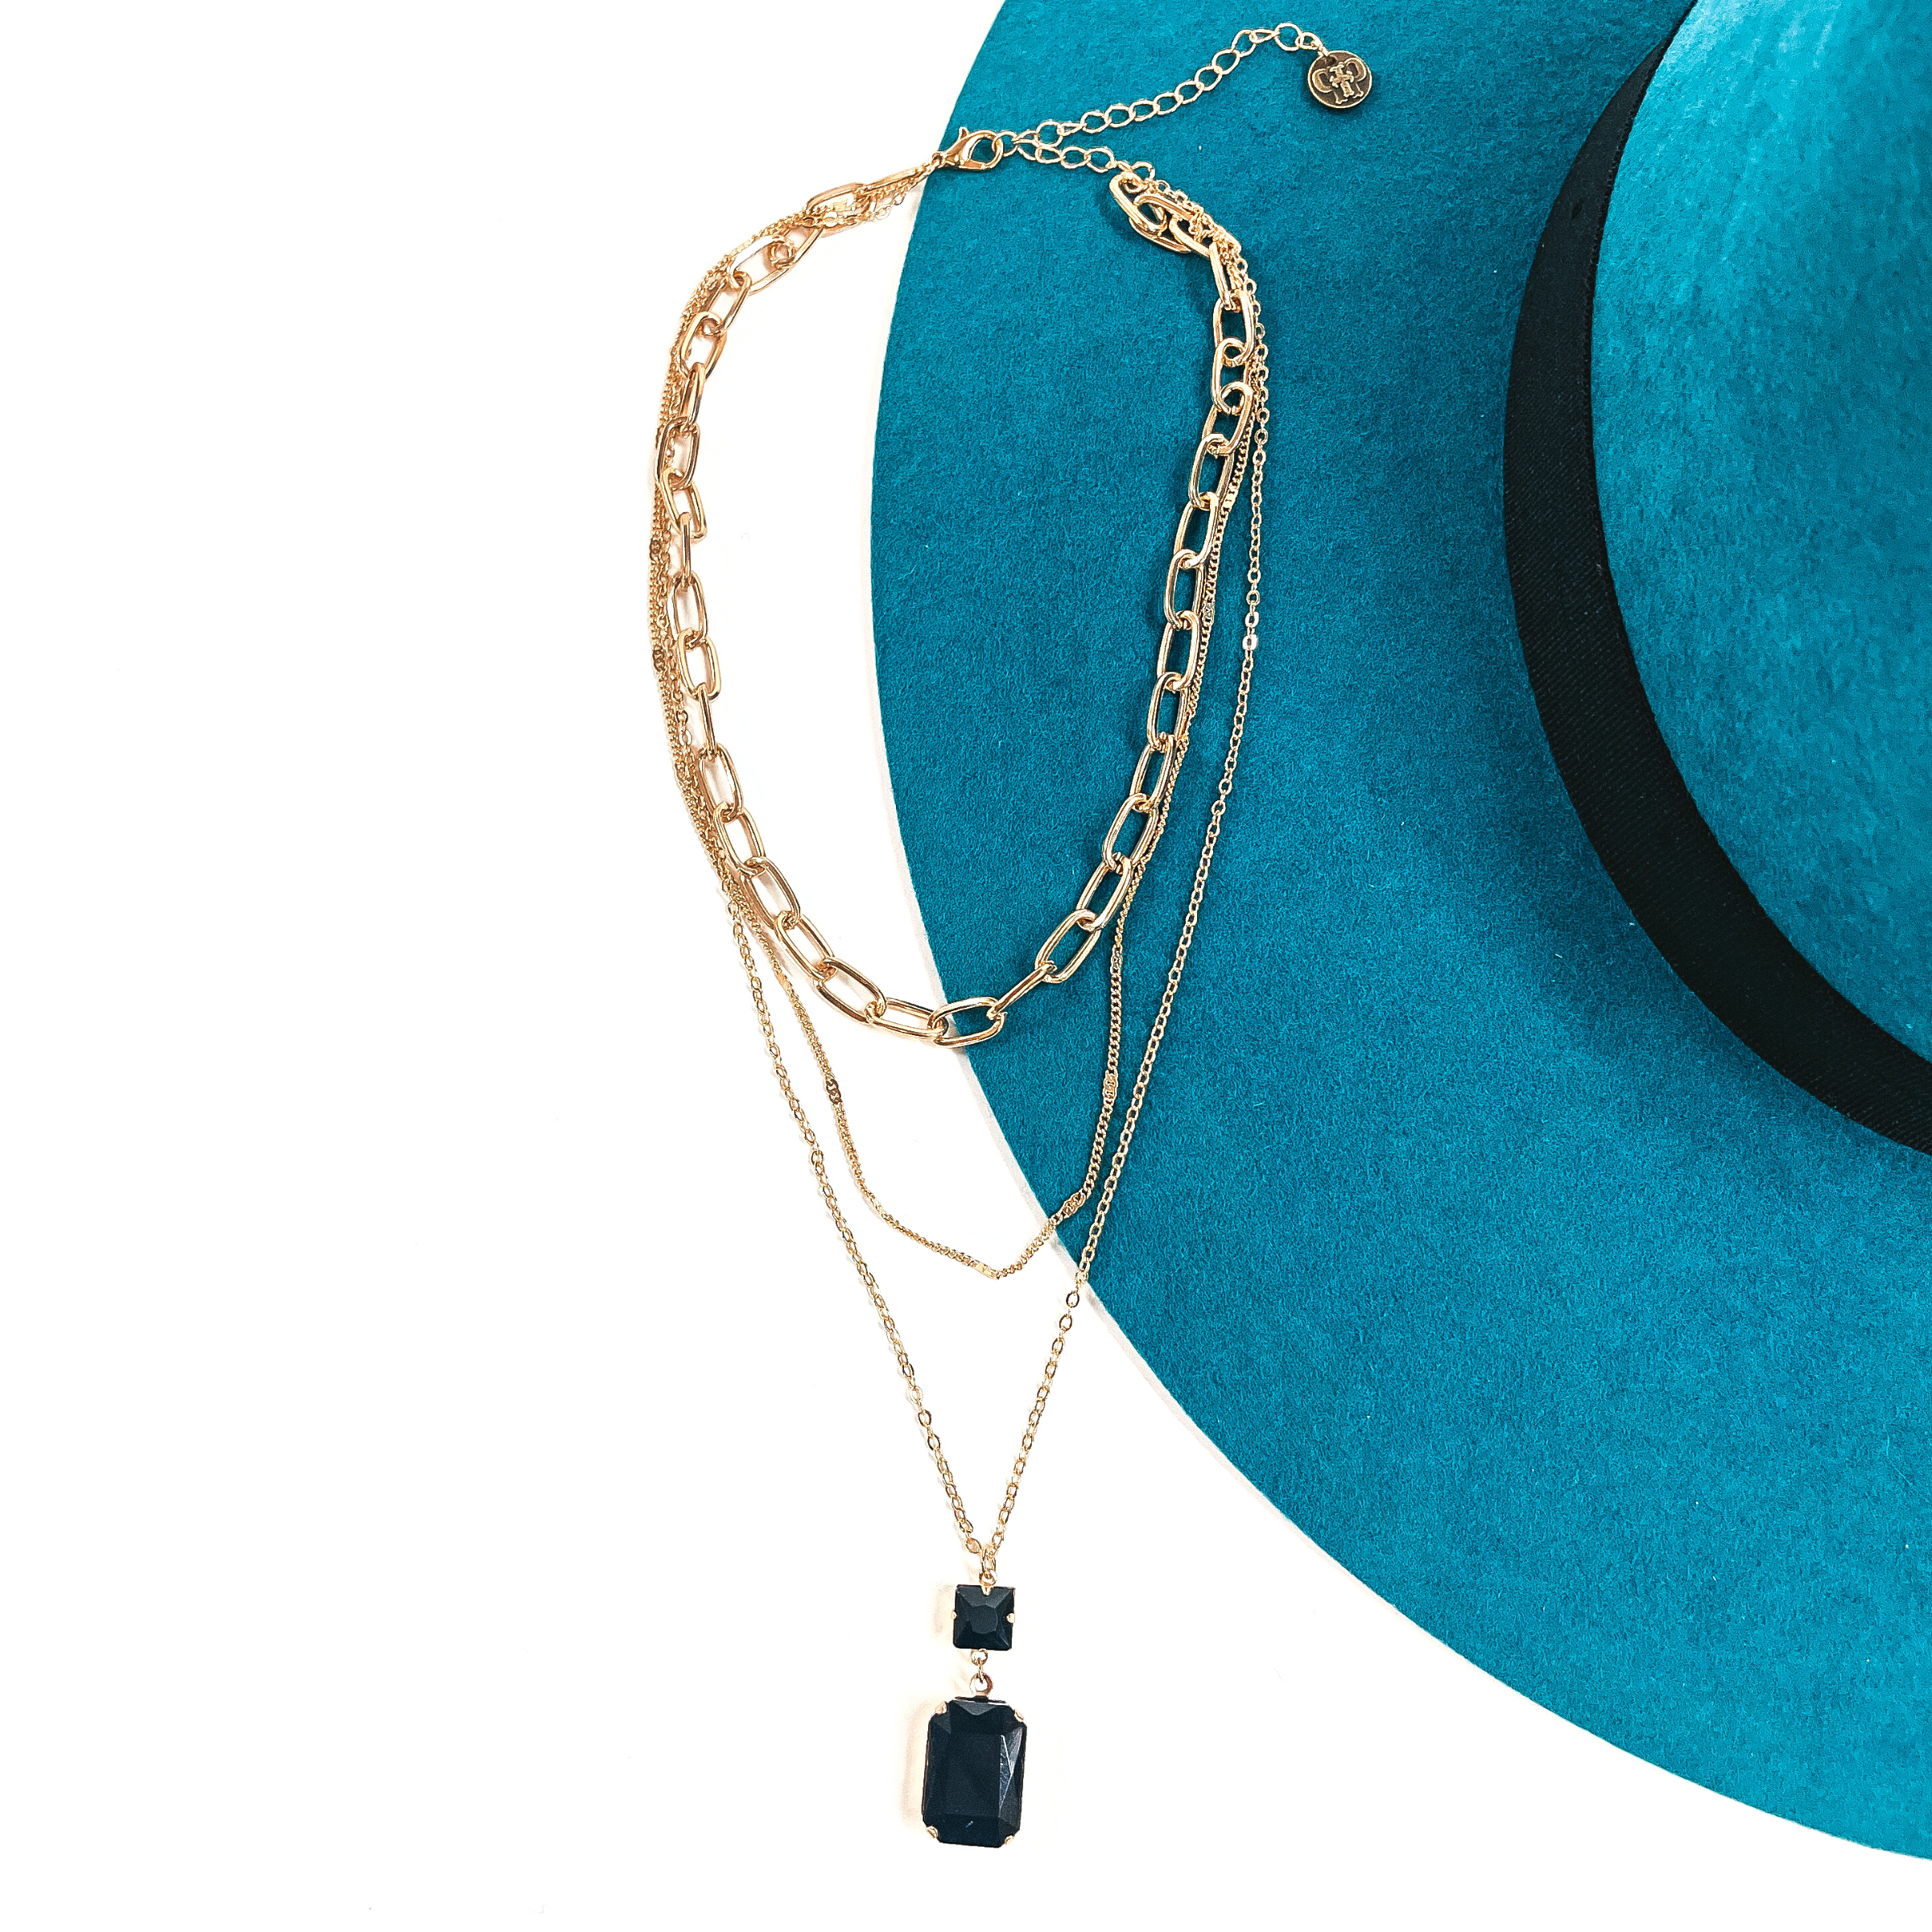 This is a three strand gold tone necklace with a black crystal pendant. There are  two thin strands and one thick chain link strand. The longest strand has a small  square black crystal connector and a rectangle black crystal. This necklace is taken  on a teal felt hat brim and on a white background.